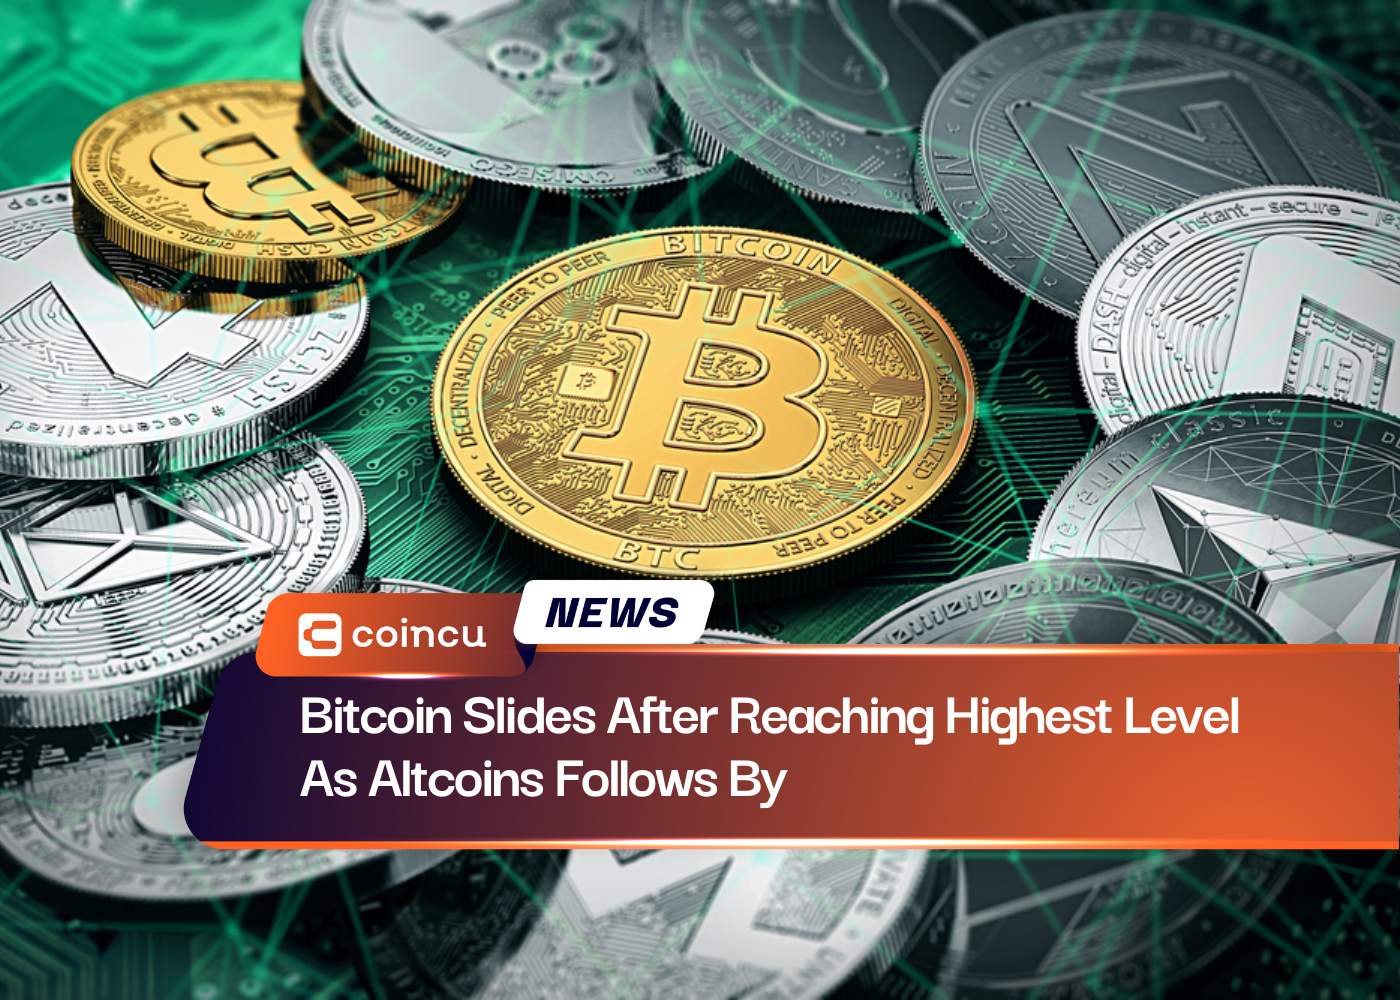 Bitcoin Slides After Reaching Highest Level As Altcoins Follows By